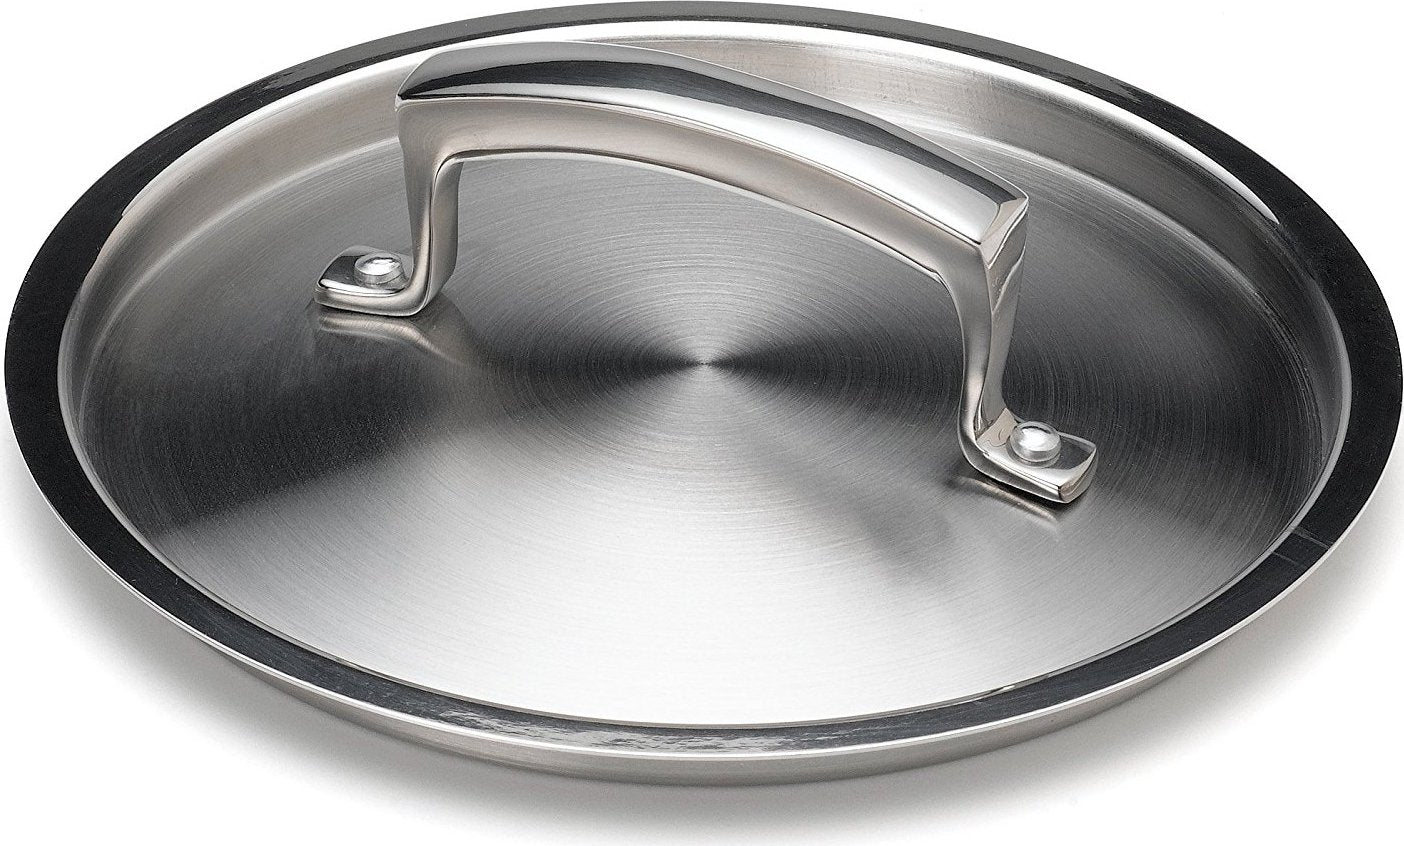 Thermalloy - 19.5" Stainless Steel Lid - 5724150